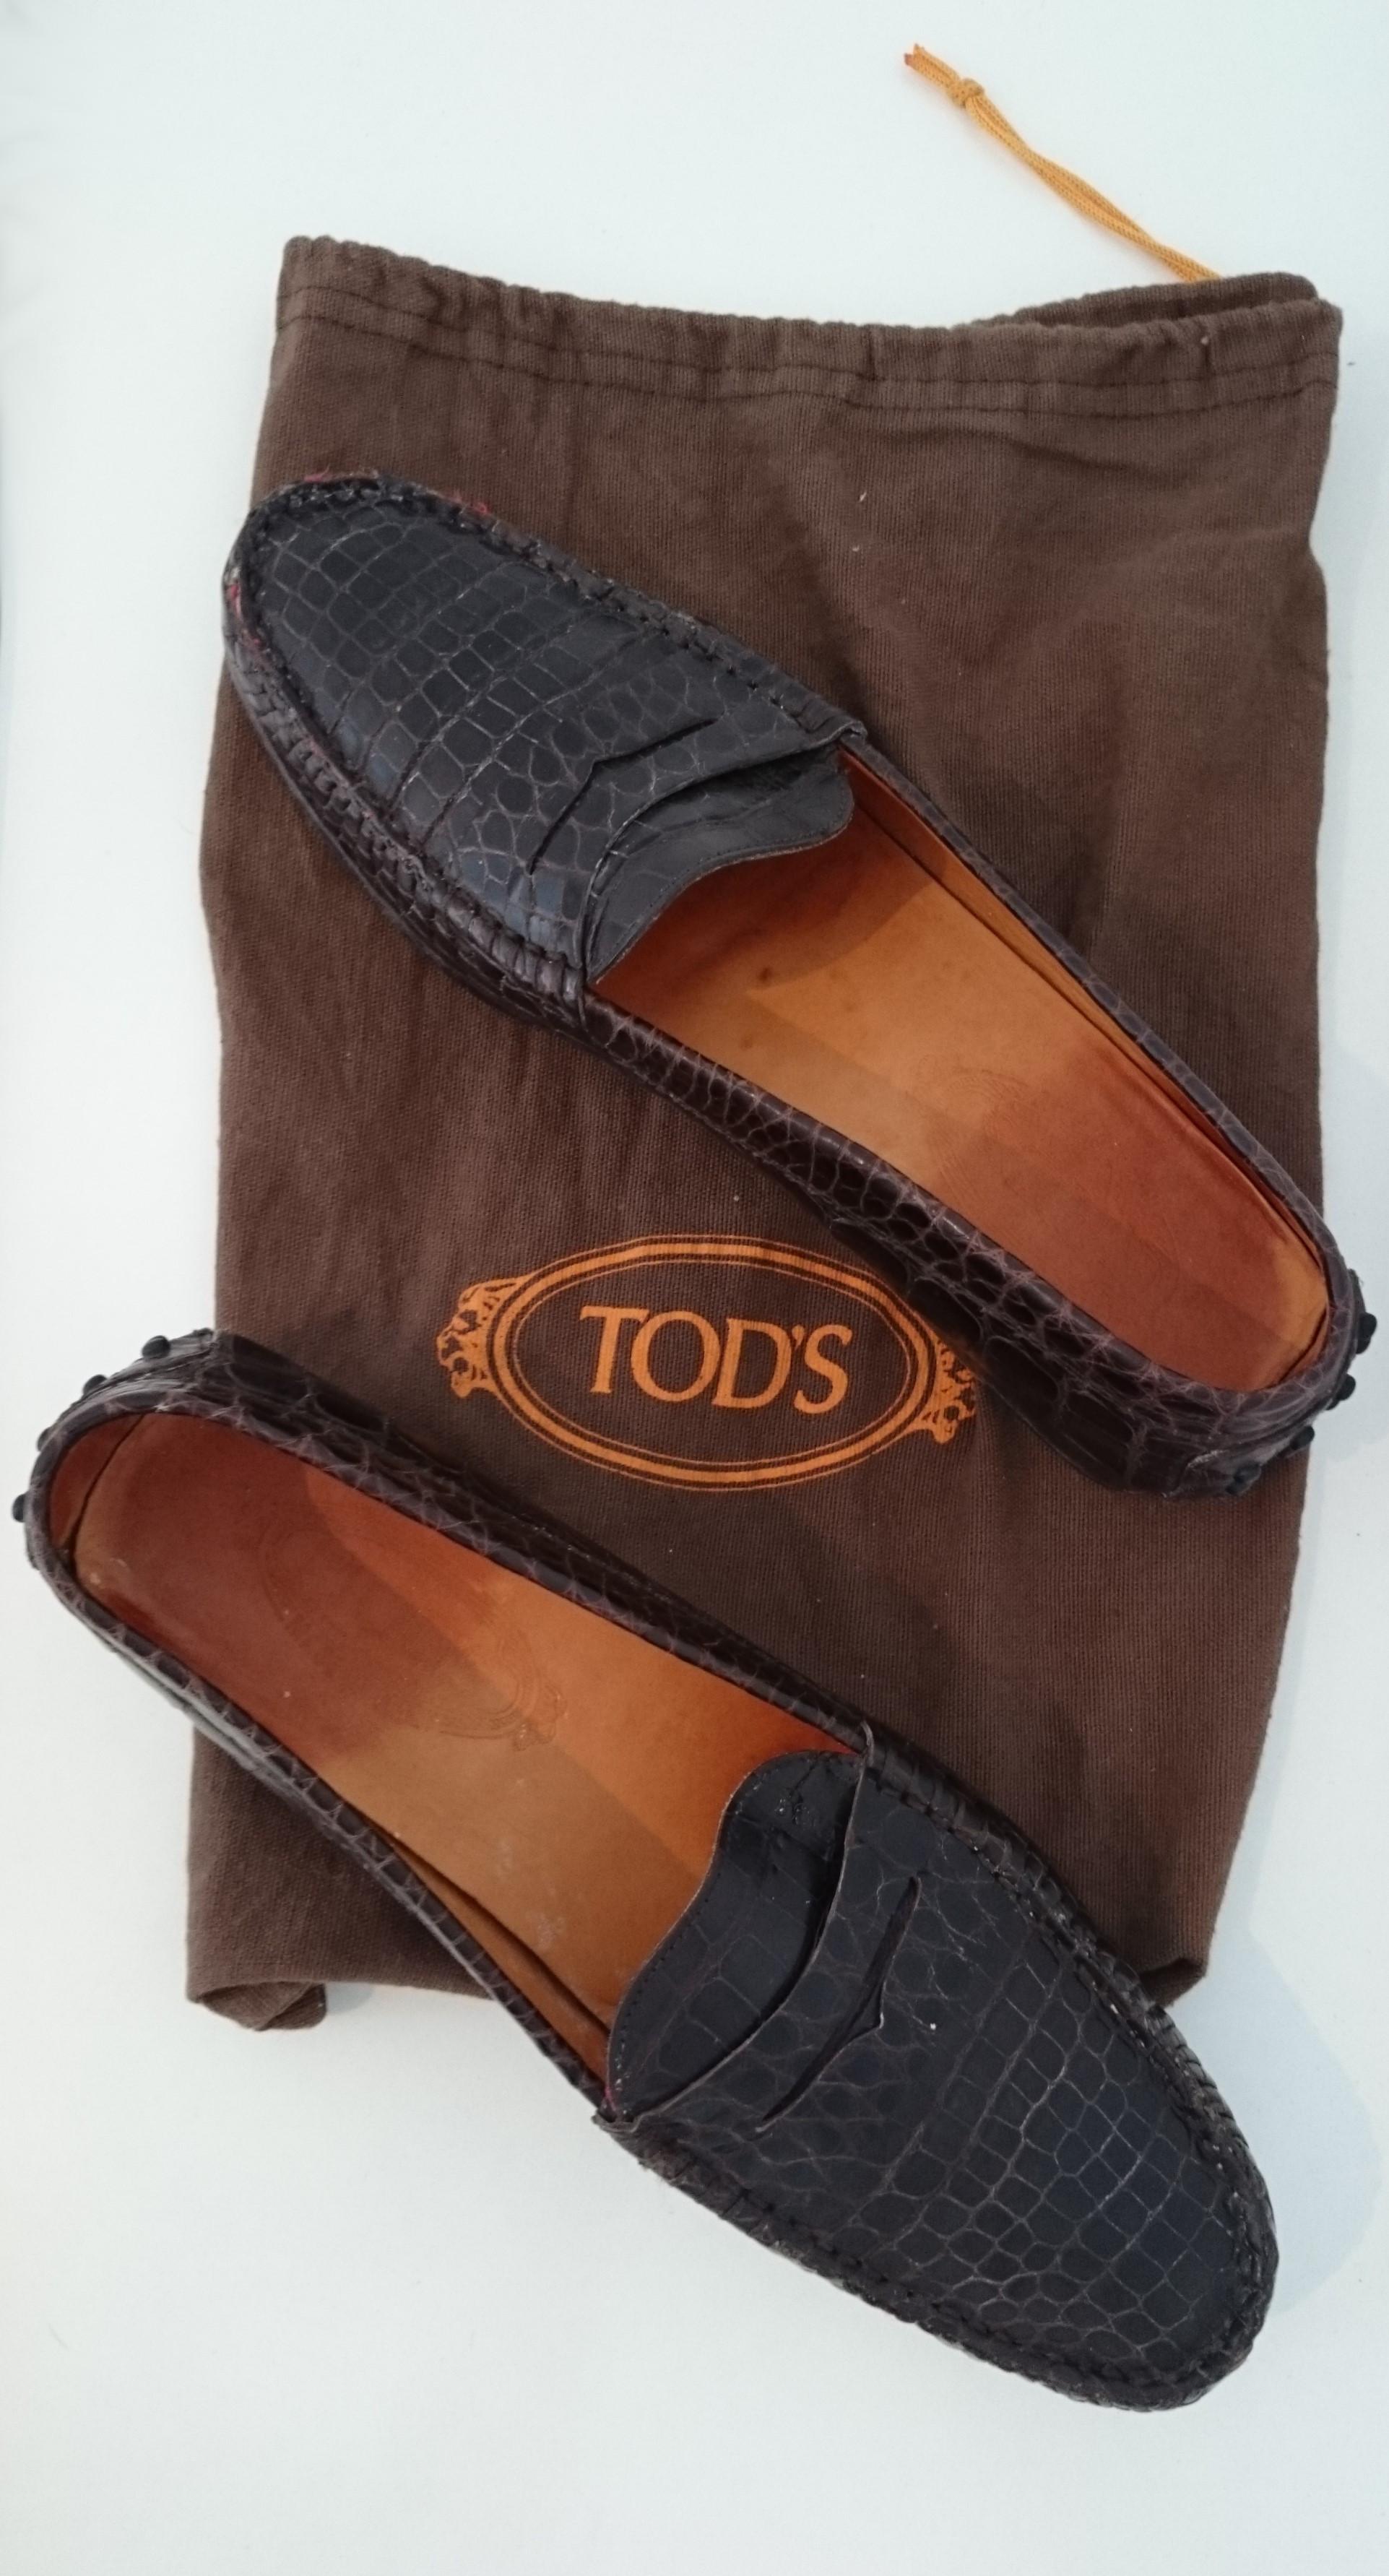  Tod's Dark Brown Mocassins in Wild Crocodile Leather. Size 40 For Sale 1